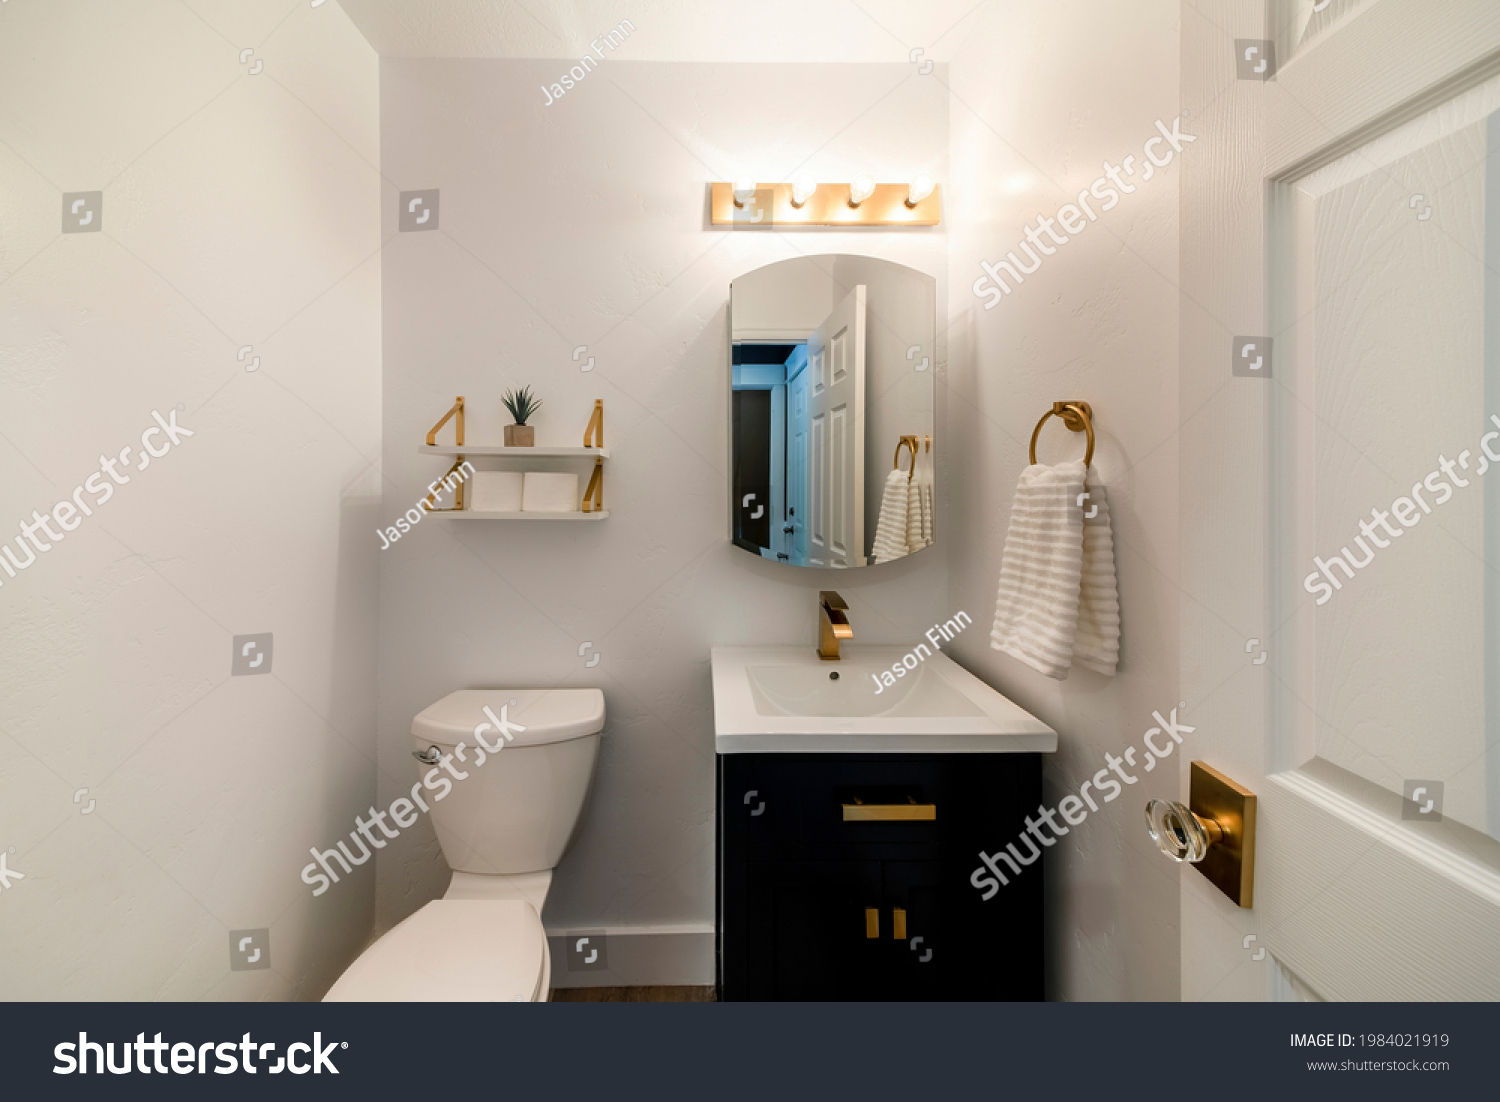 Modern powder room design with matching gold fixtures. Single vanity sink with dark wood cabinet and round mirror beside the toilet bowl under the layered shelves with gold brackets. #1984021919